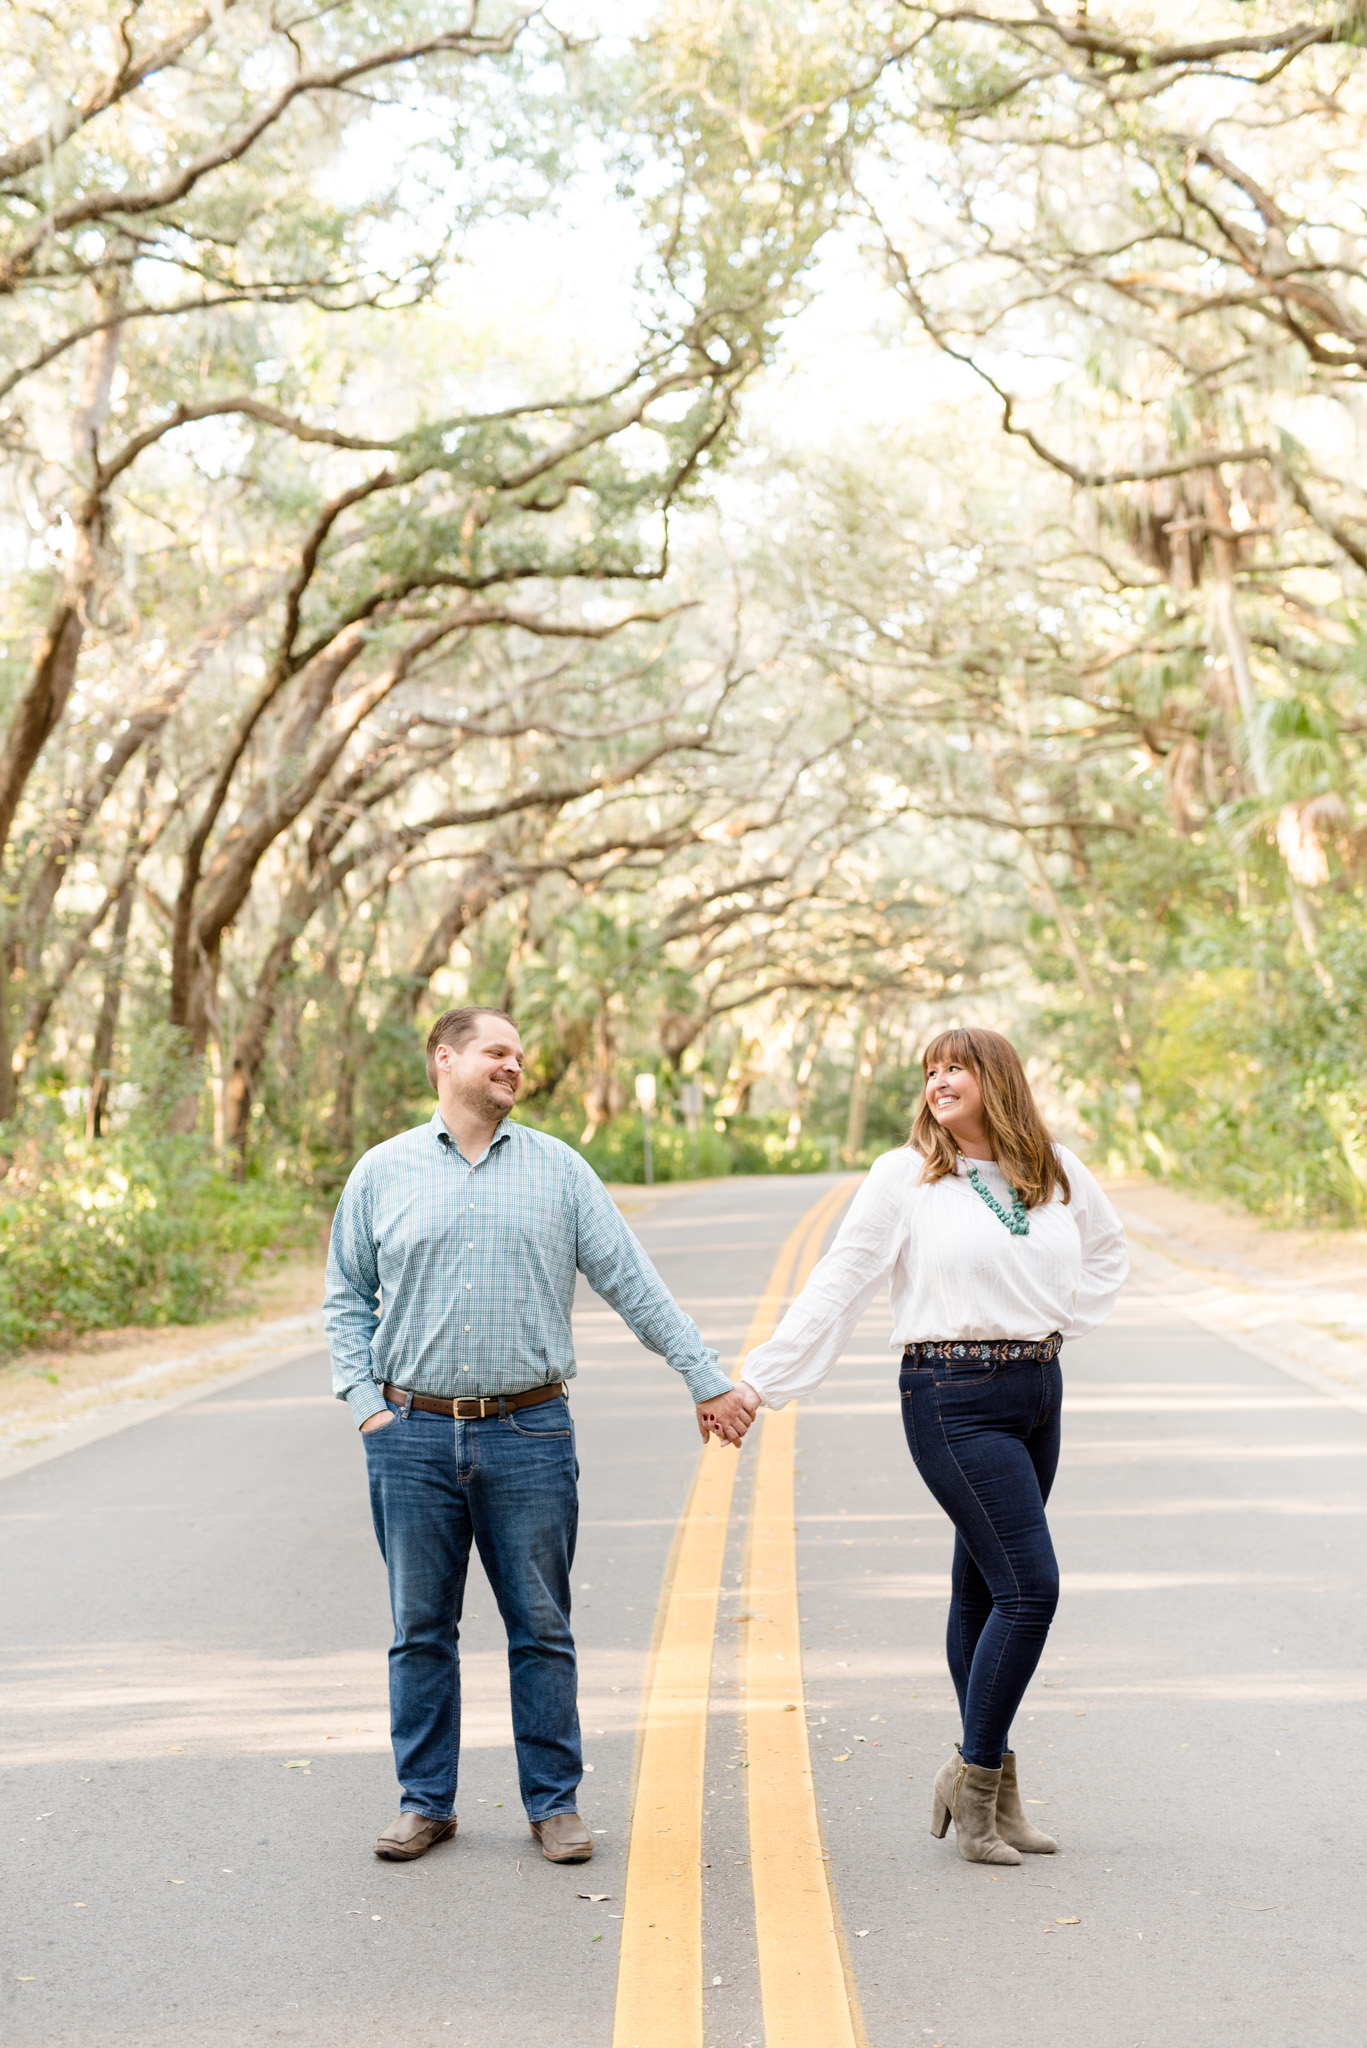 Couple smiles while standing in road.